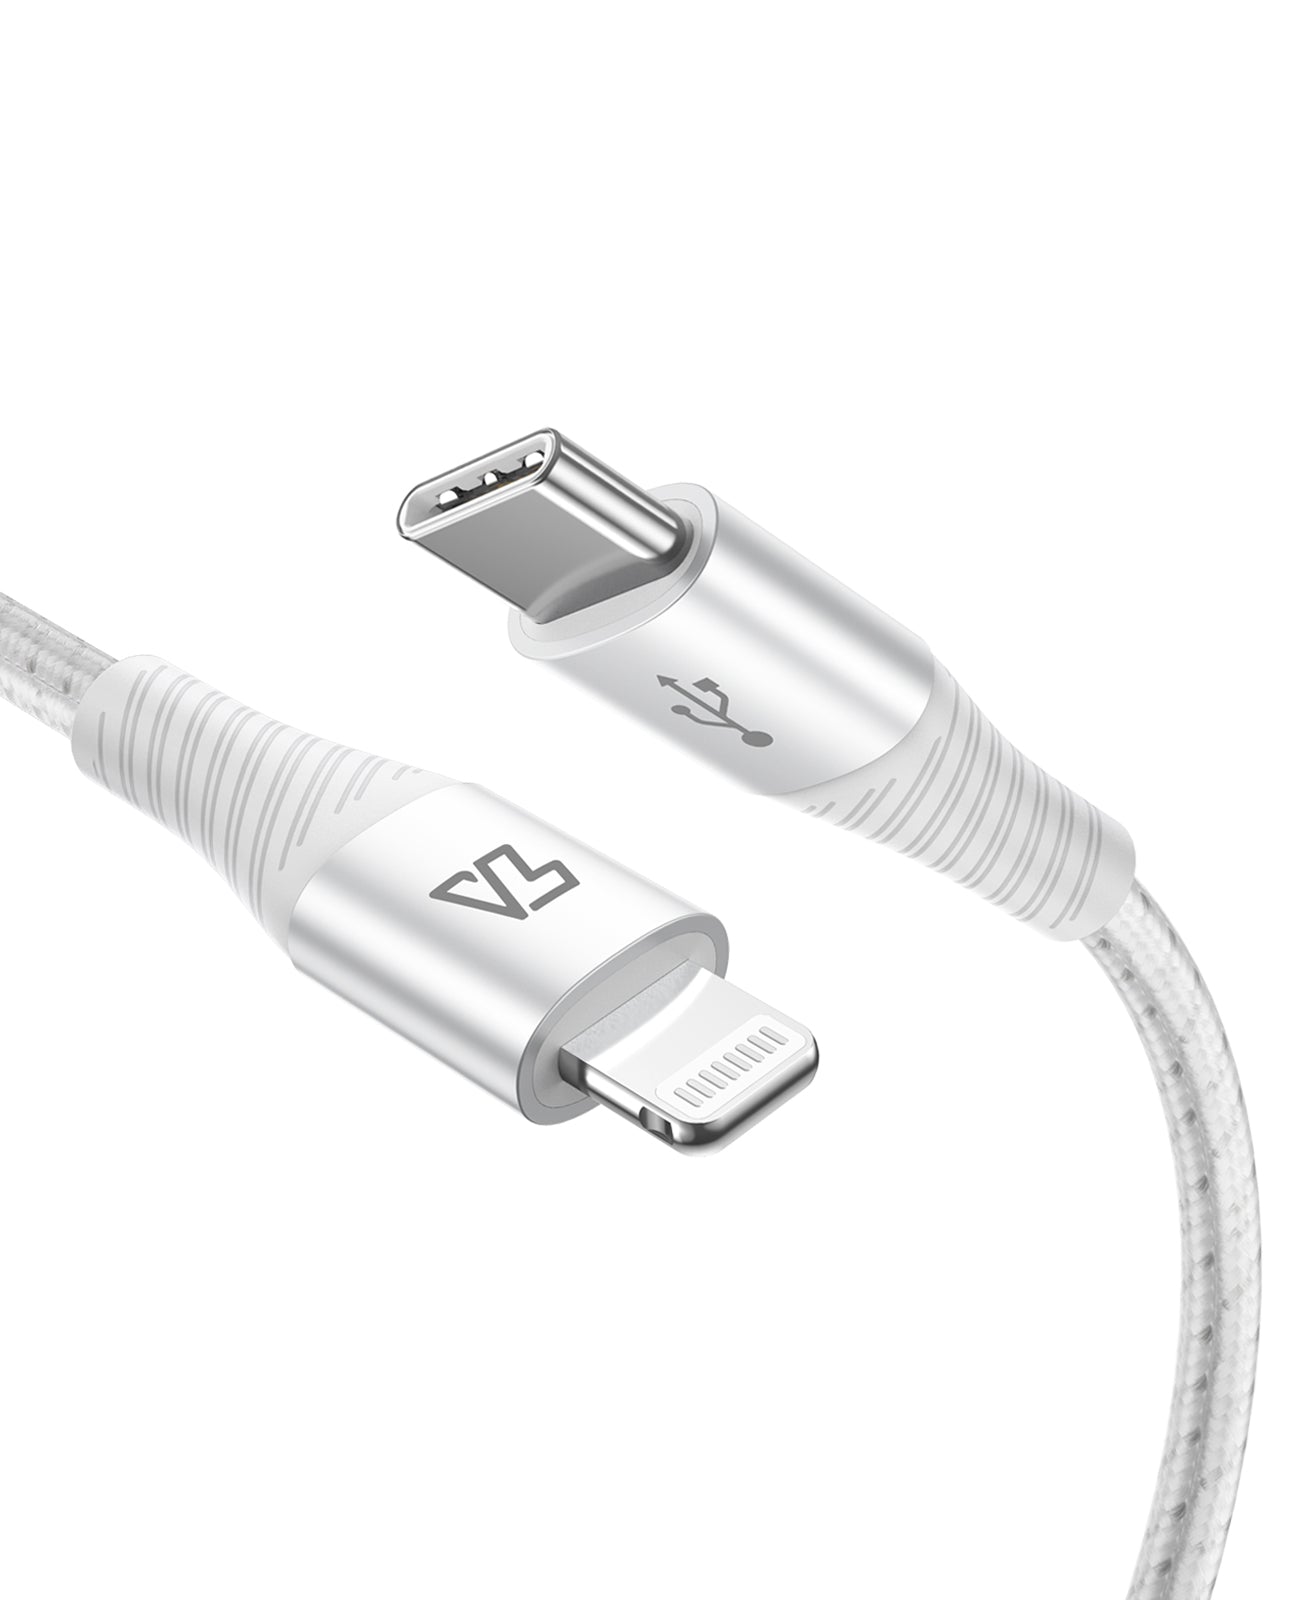 USB C to Lightning Cable, 6FT/1.8M